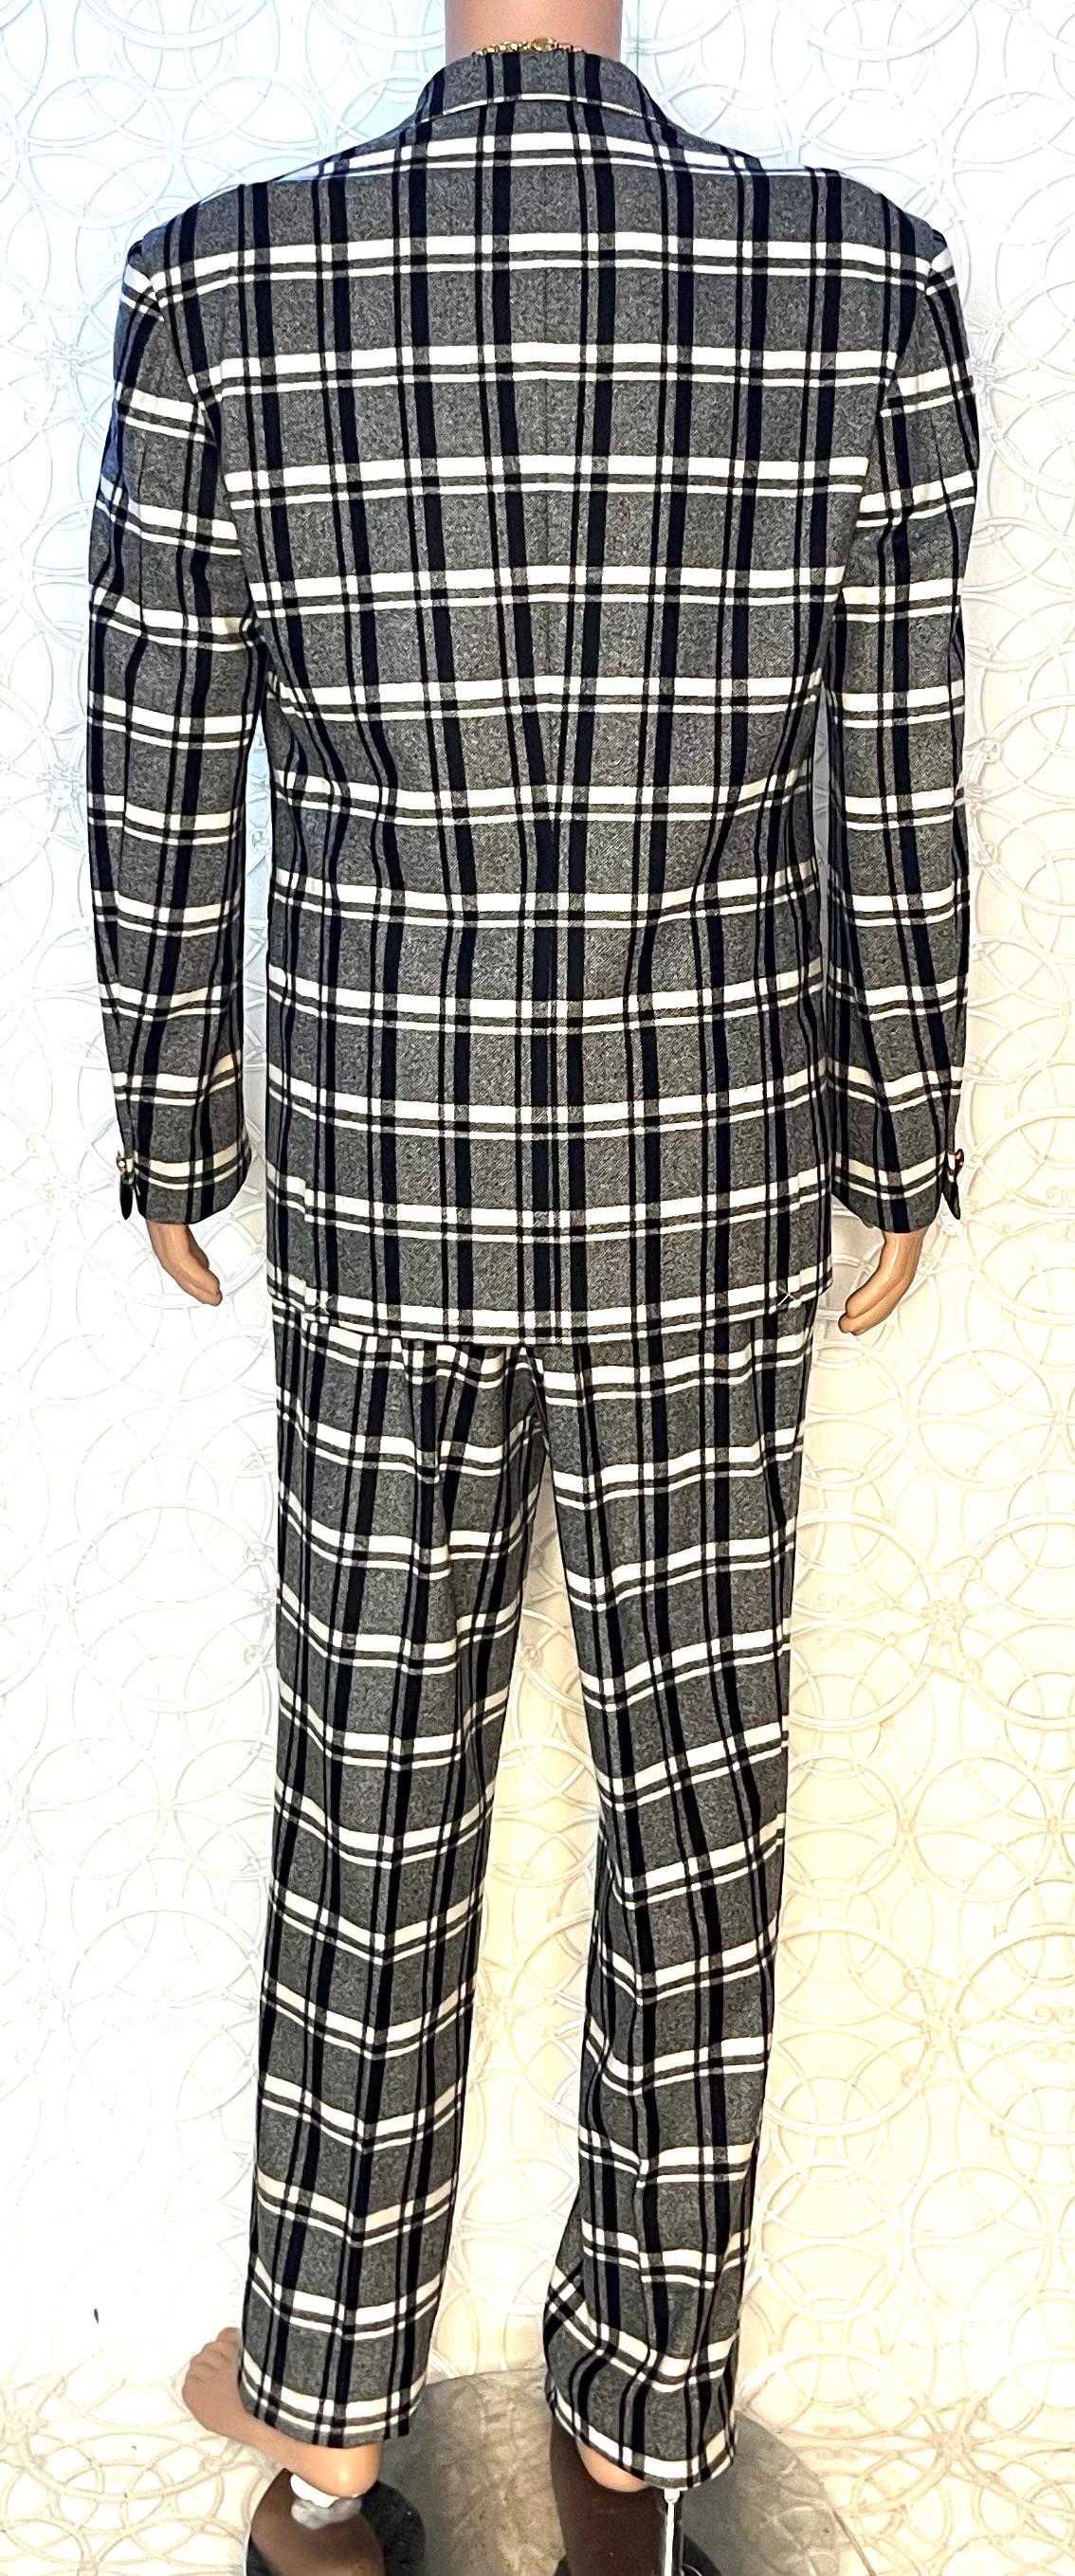 F/W2013 look #2 BRAND NEW VERSACE CHECKERED 100% WOOL SUIT 50 - 40 (L) For Sale 2